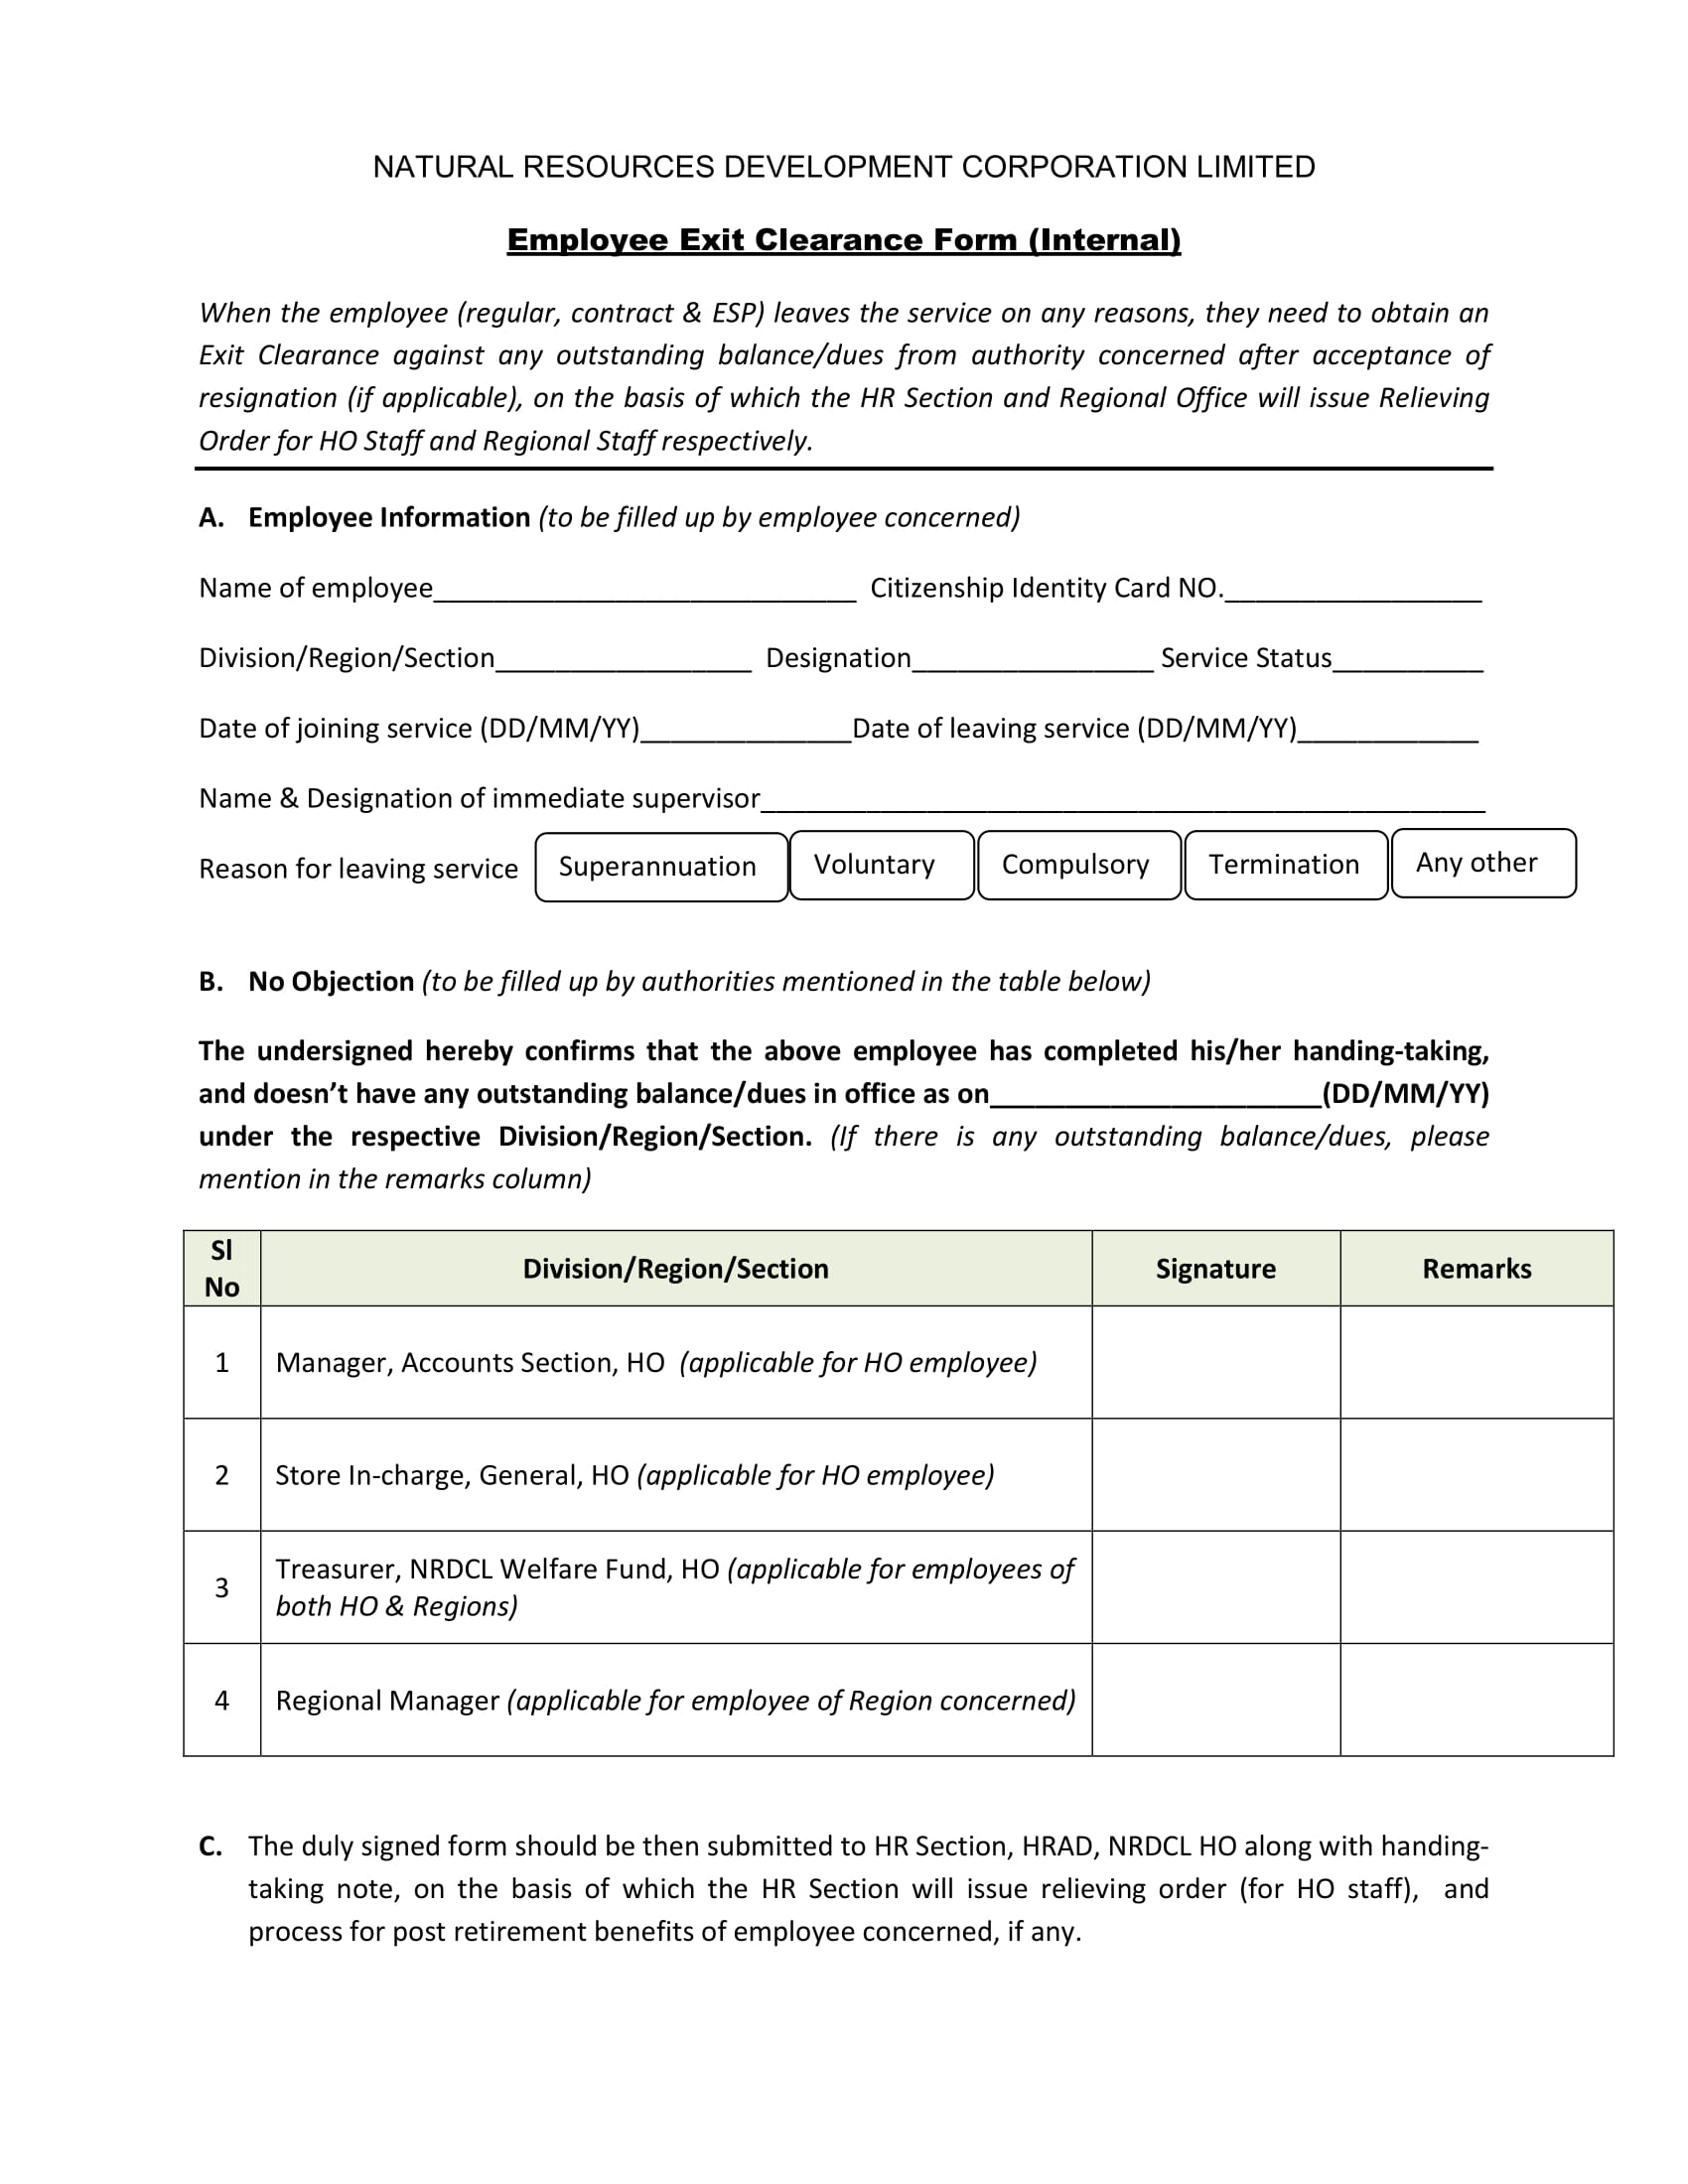 SAMPLE OF EMPLOYEE EXIT CLEARANCE FORM